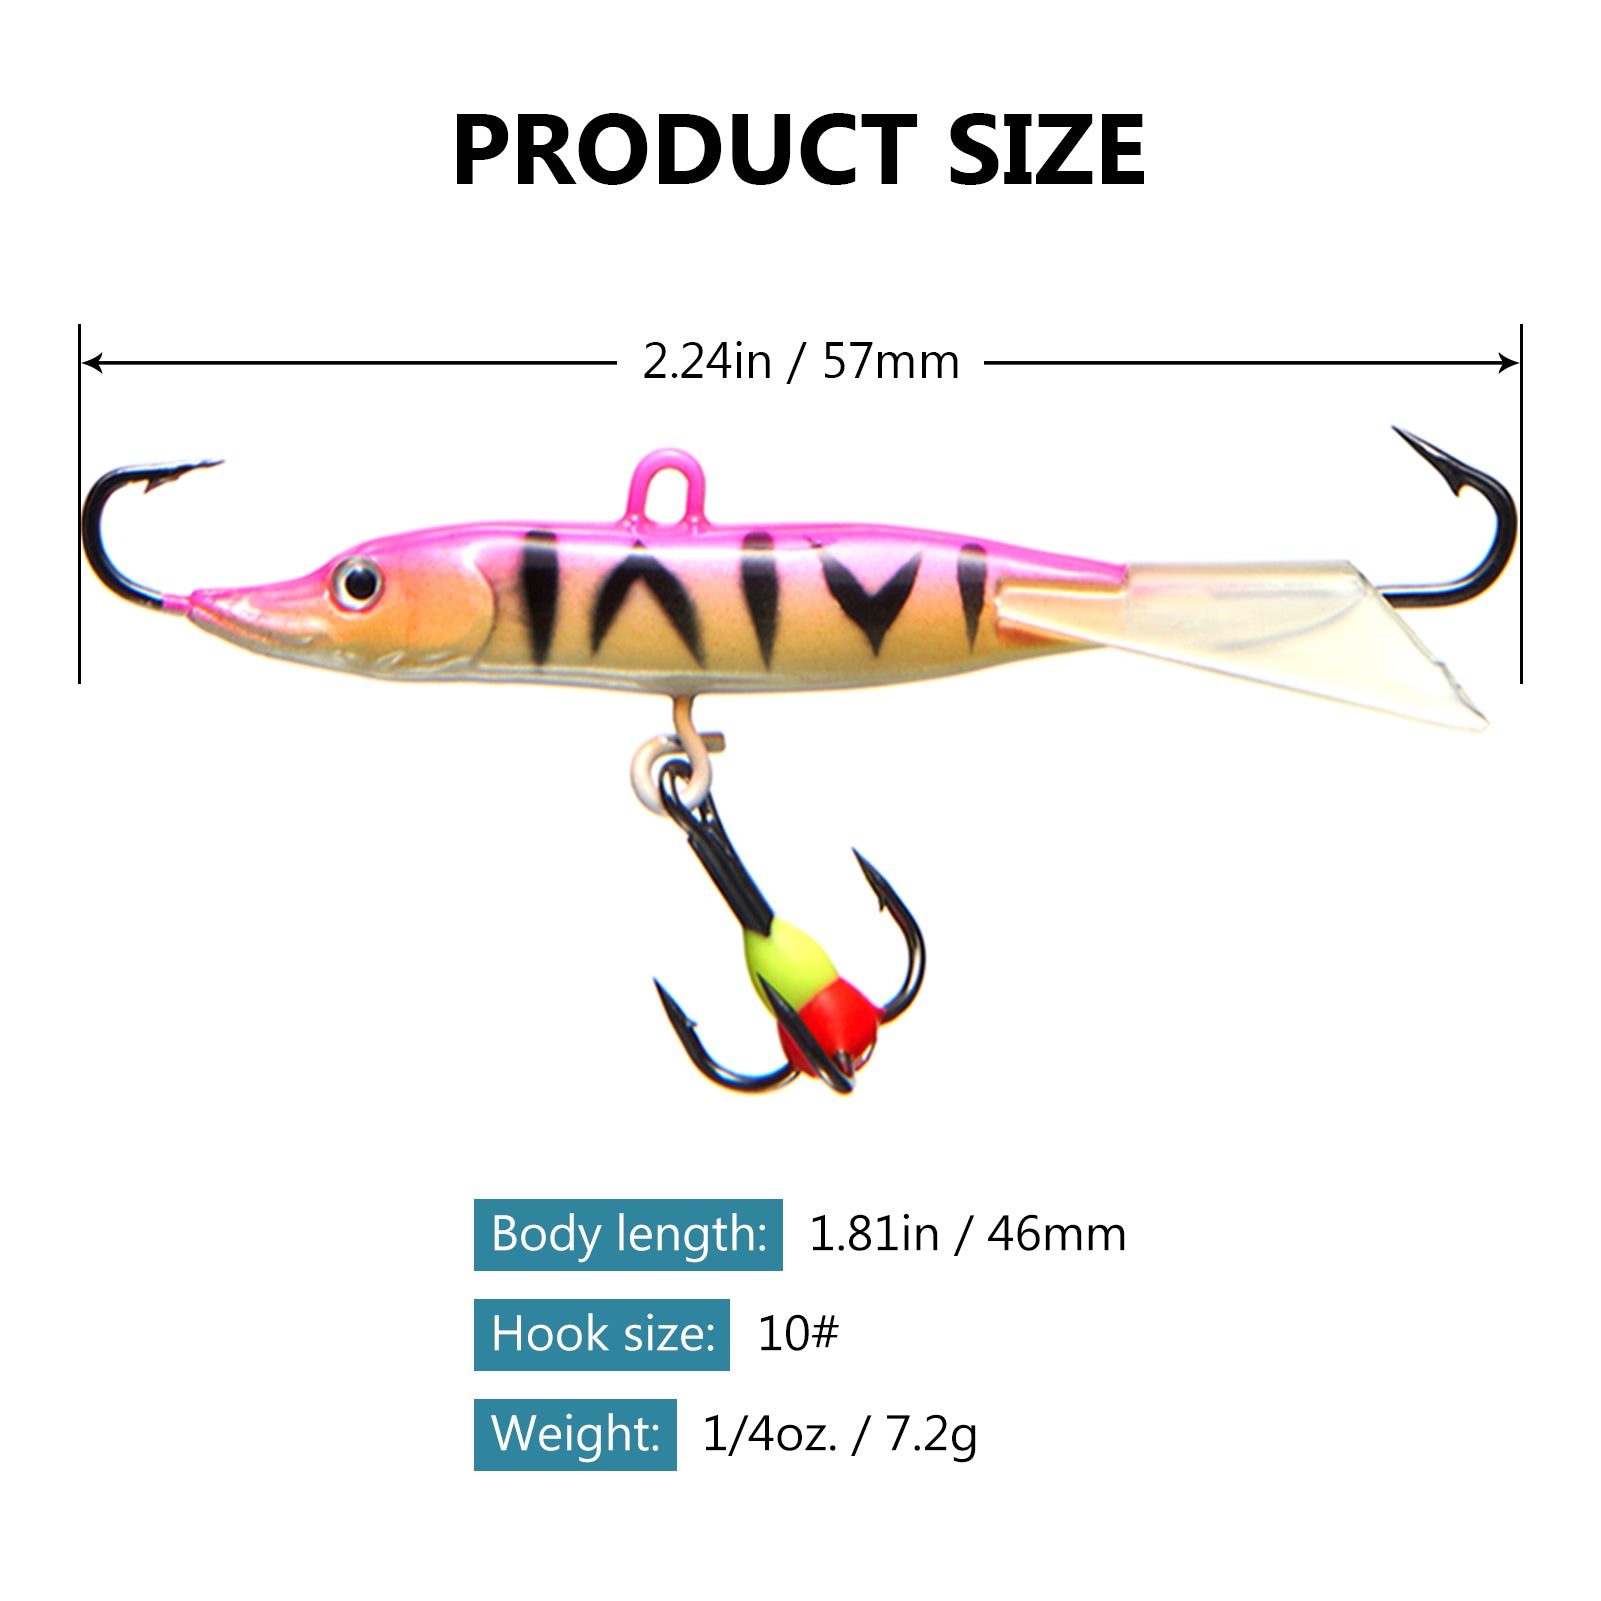 Wholesale fishing lure lights vibrates for A Different Fishing Experience –